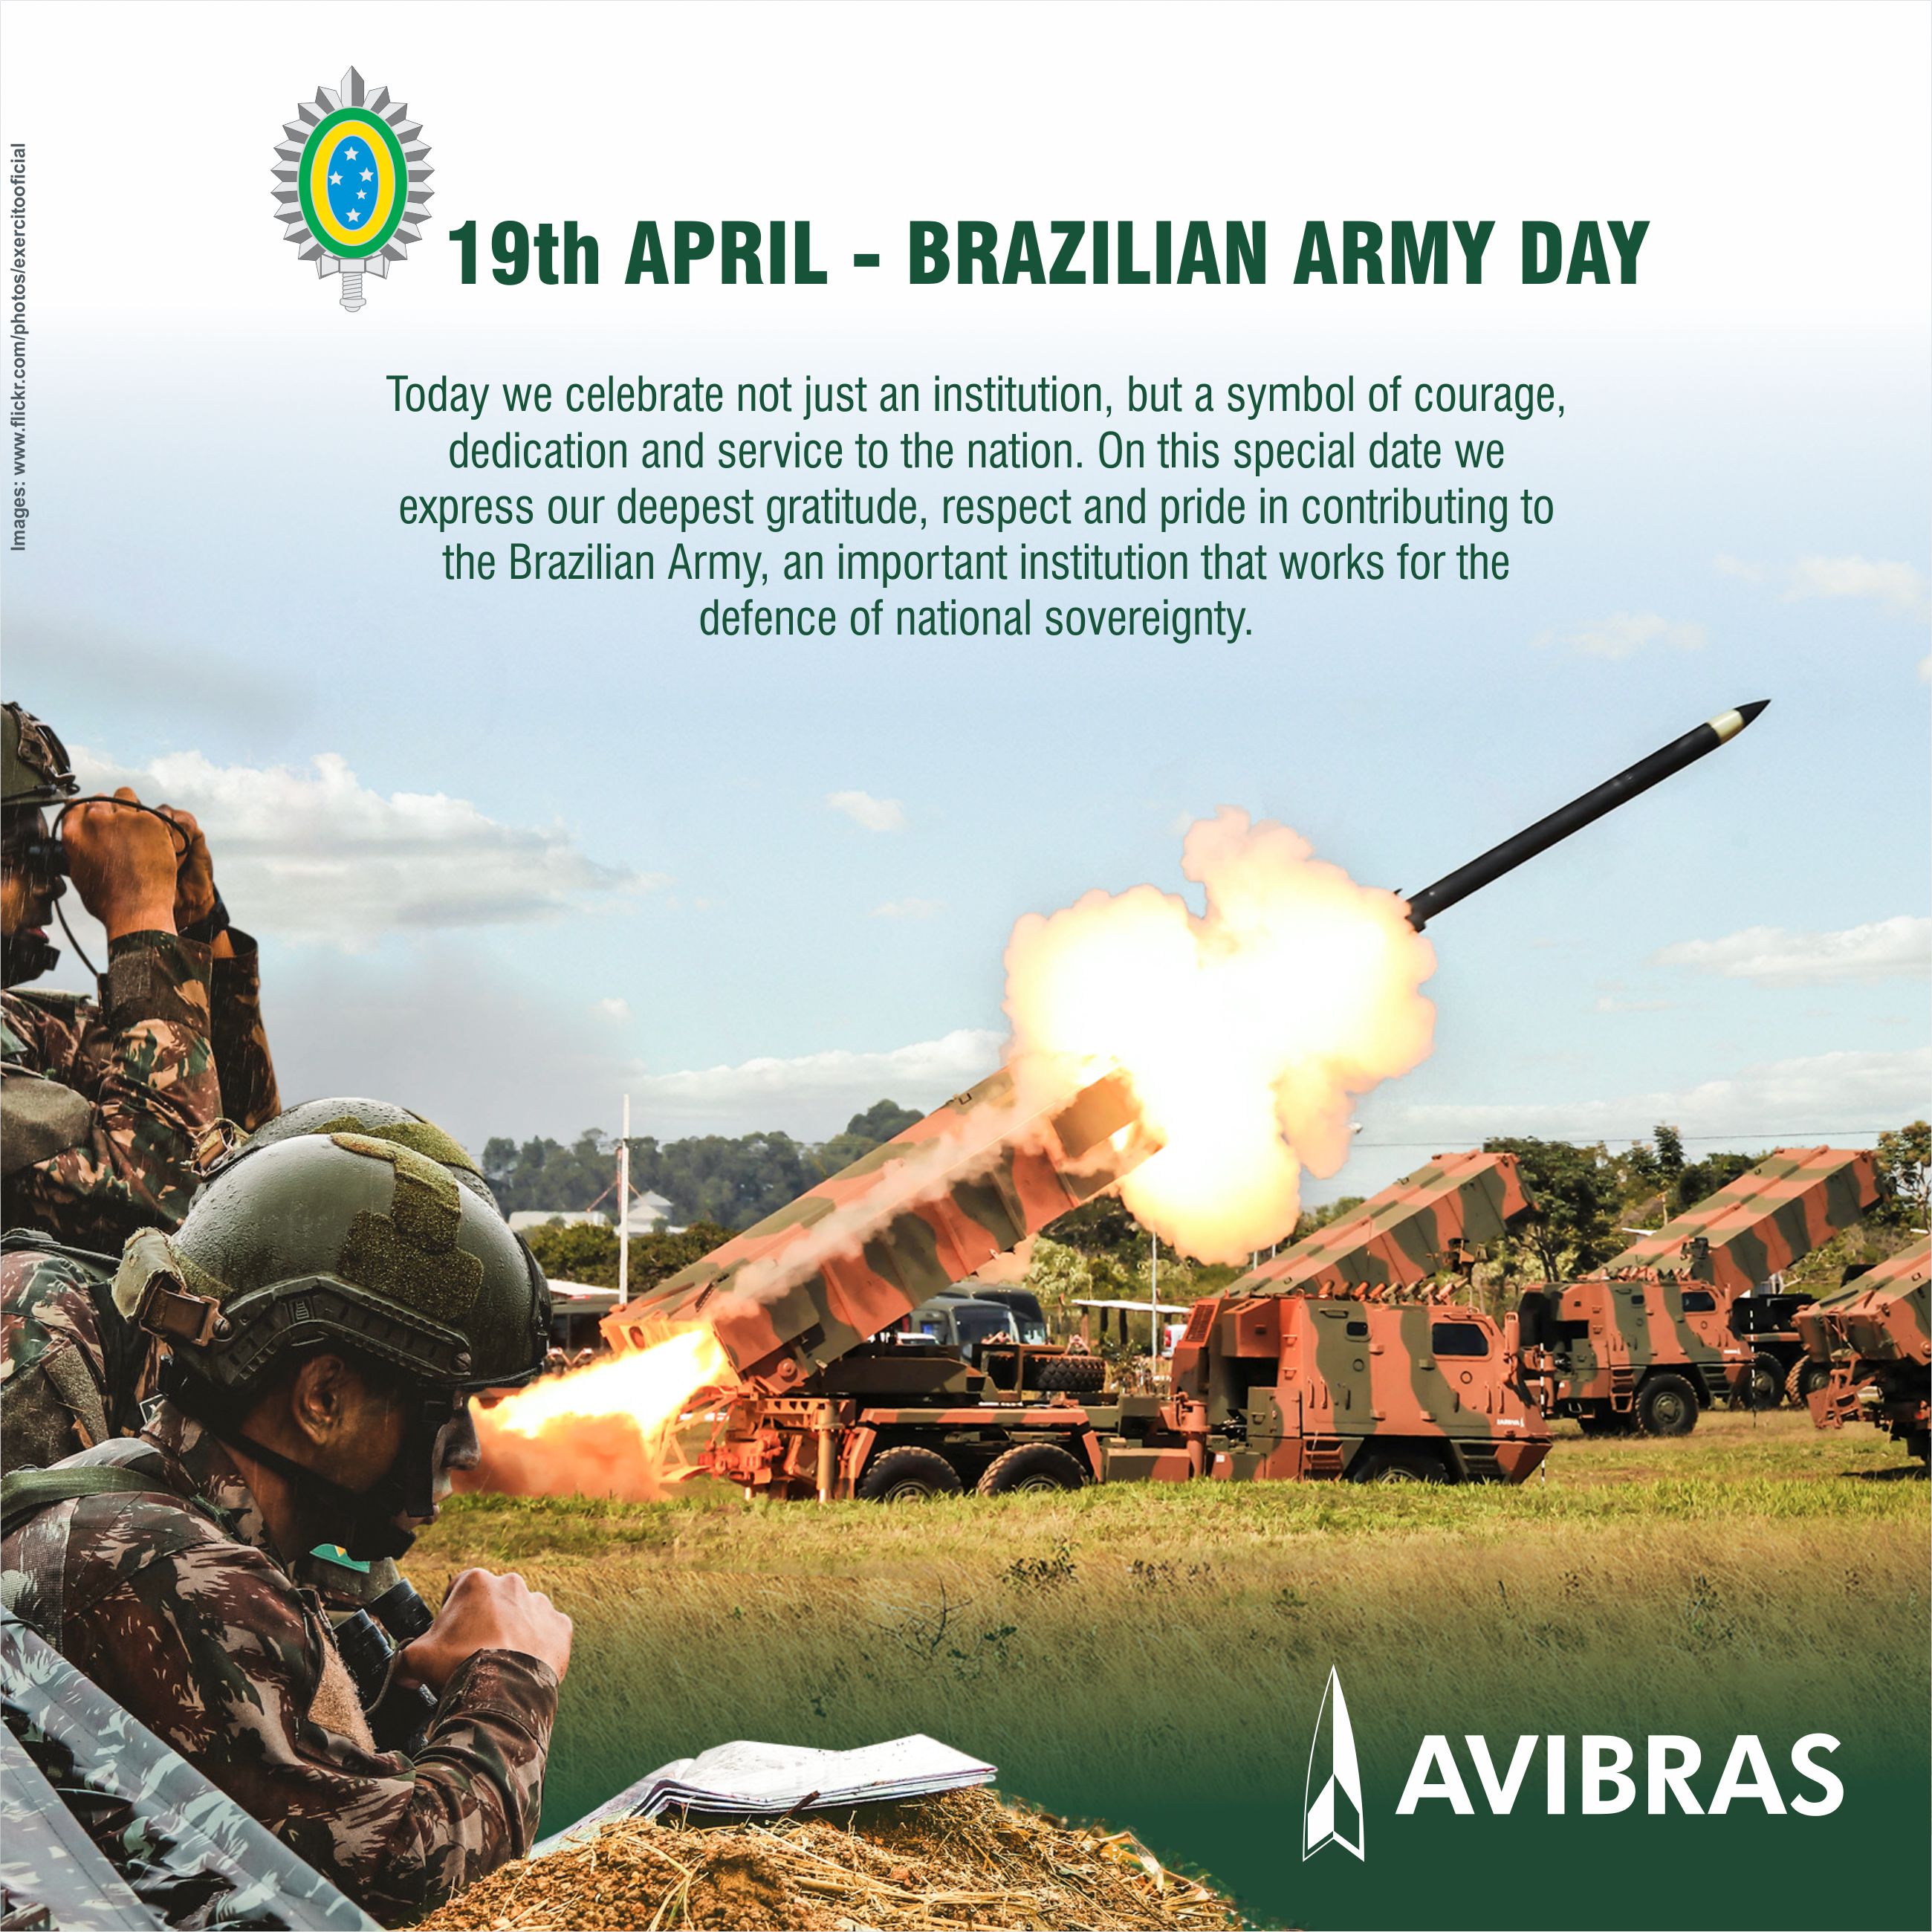 Our tribute to Brazilian Army Day 